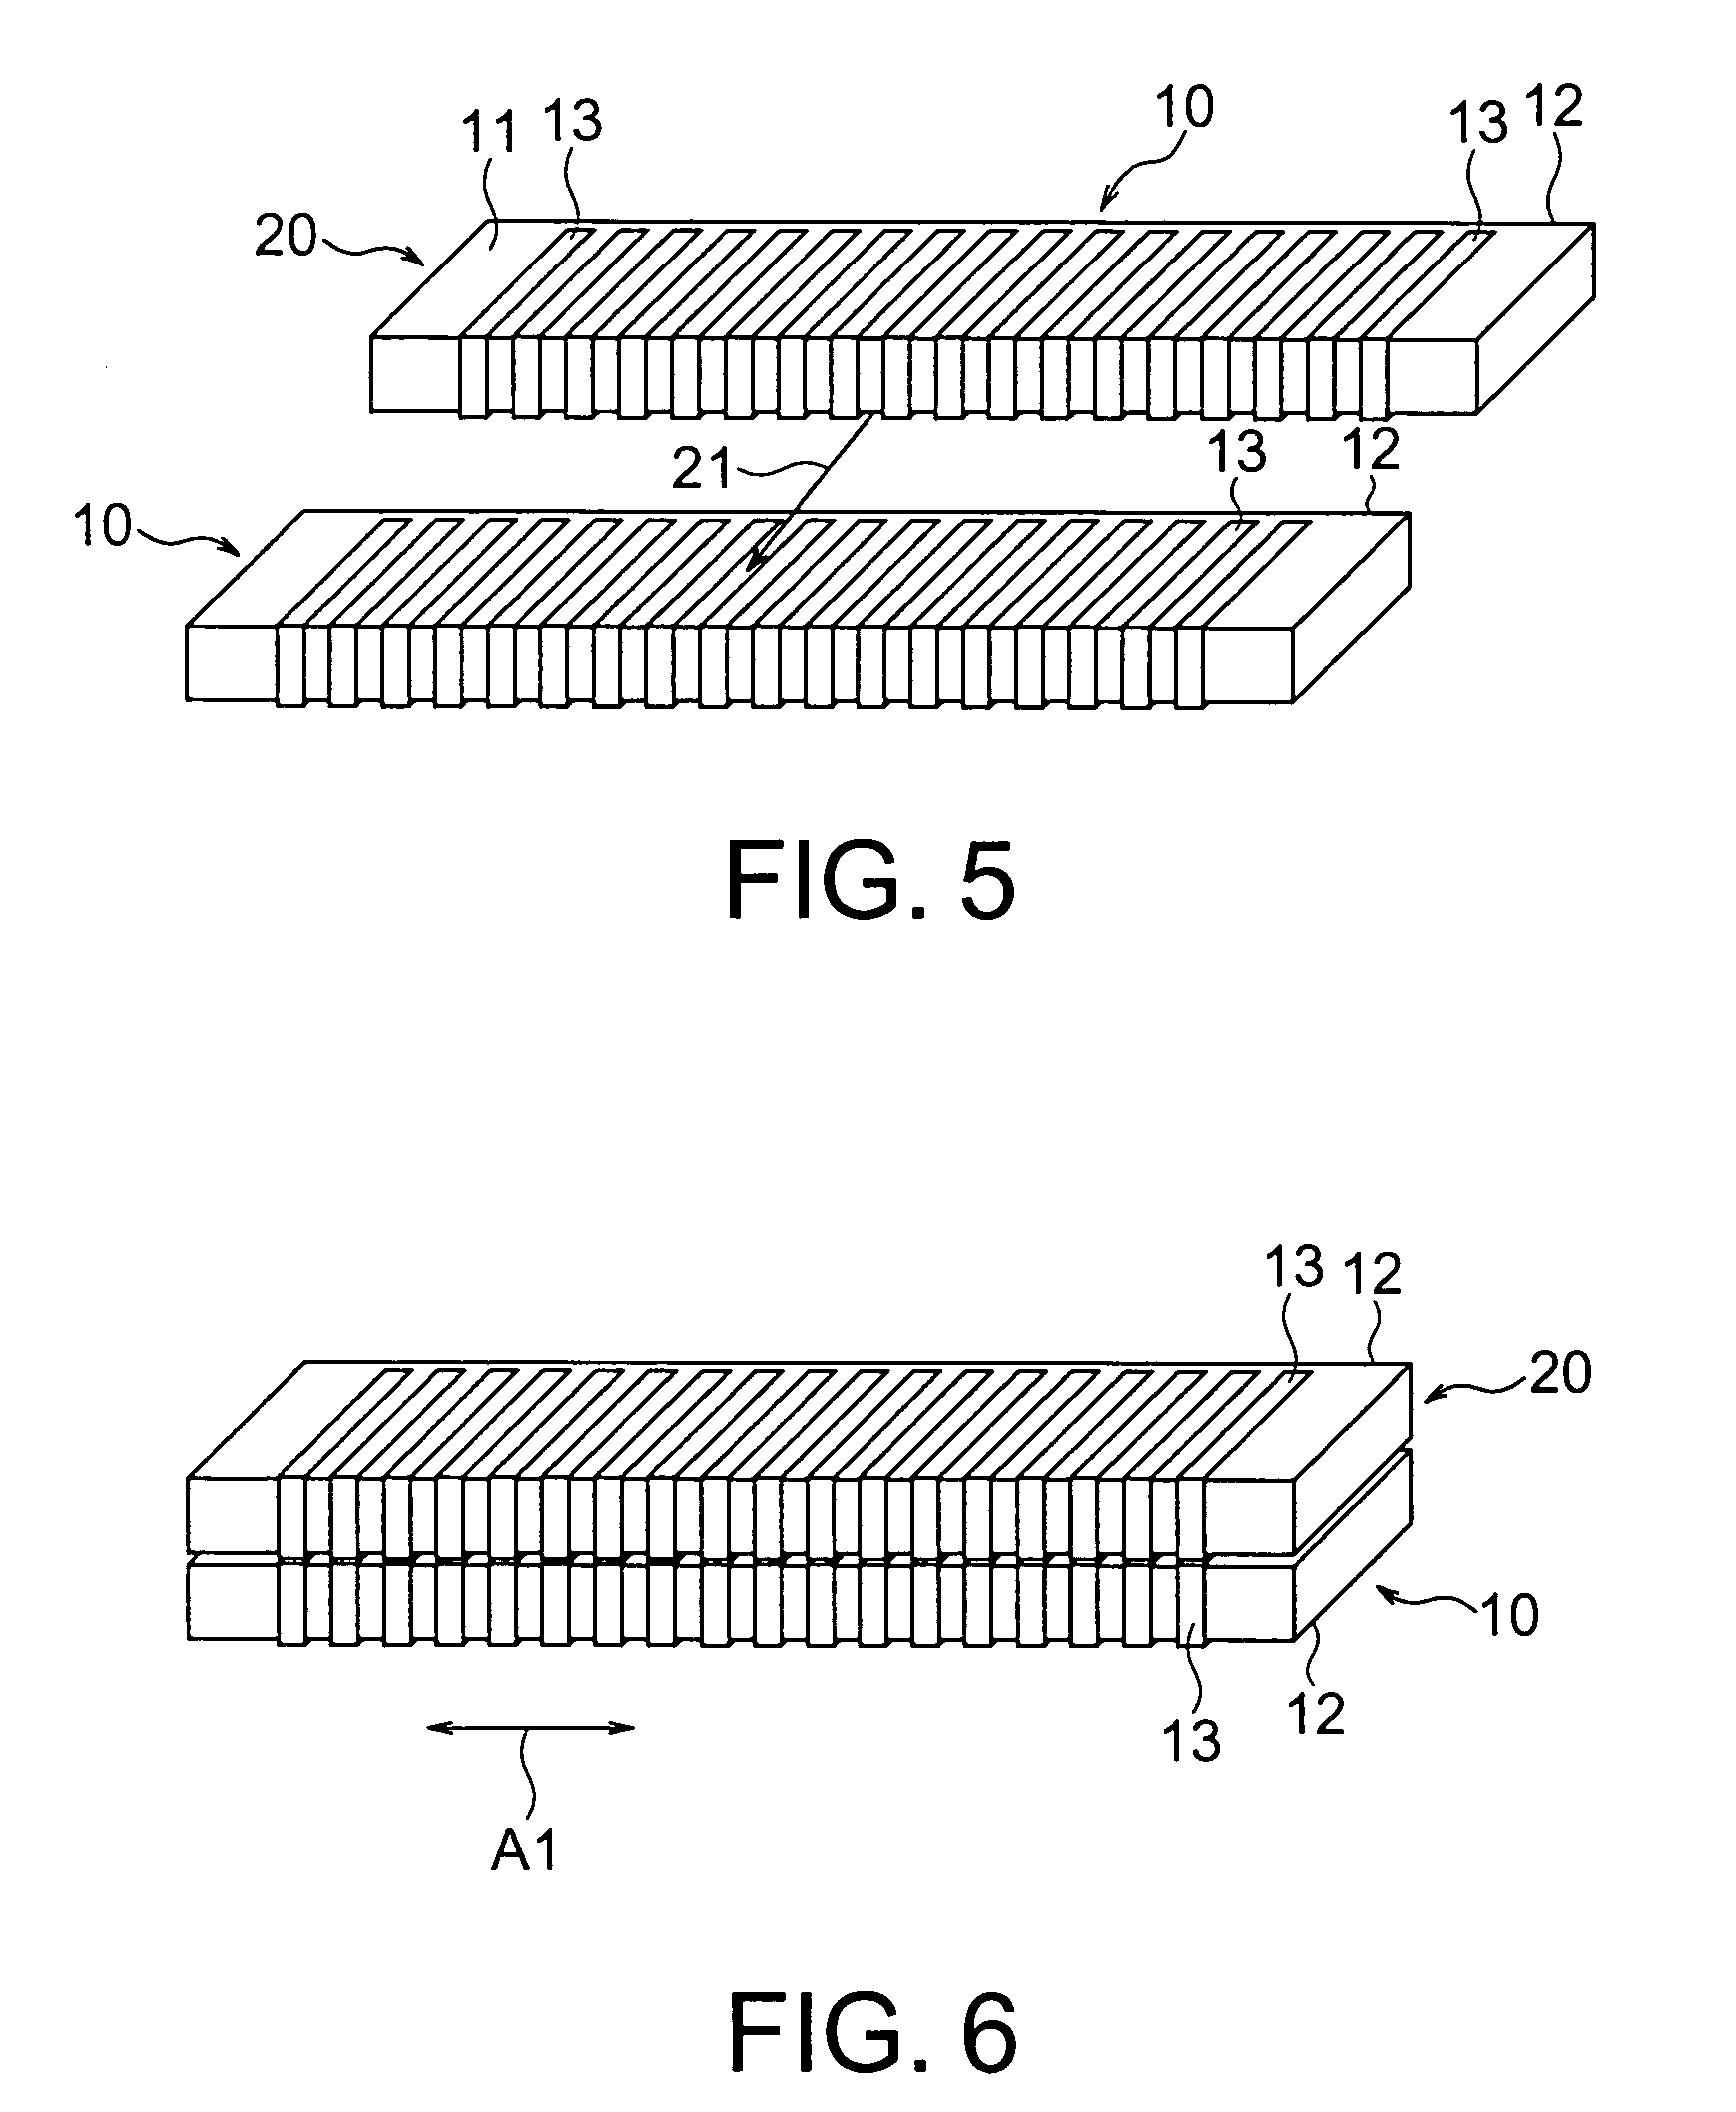 Self-alignment magnetic connector reduced in size